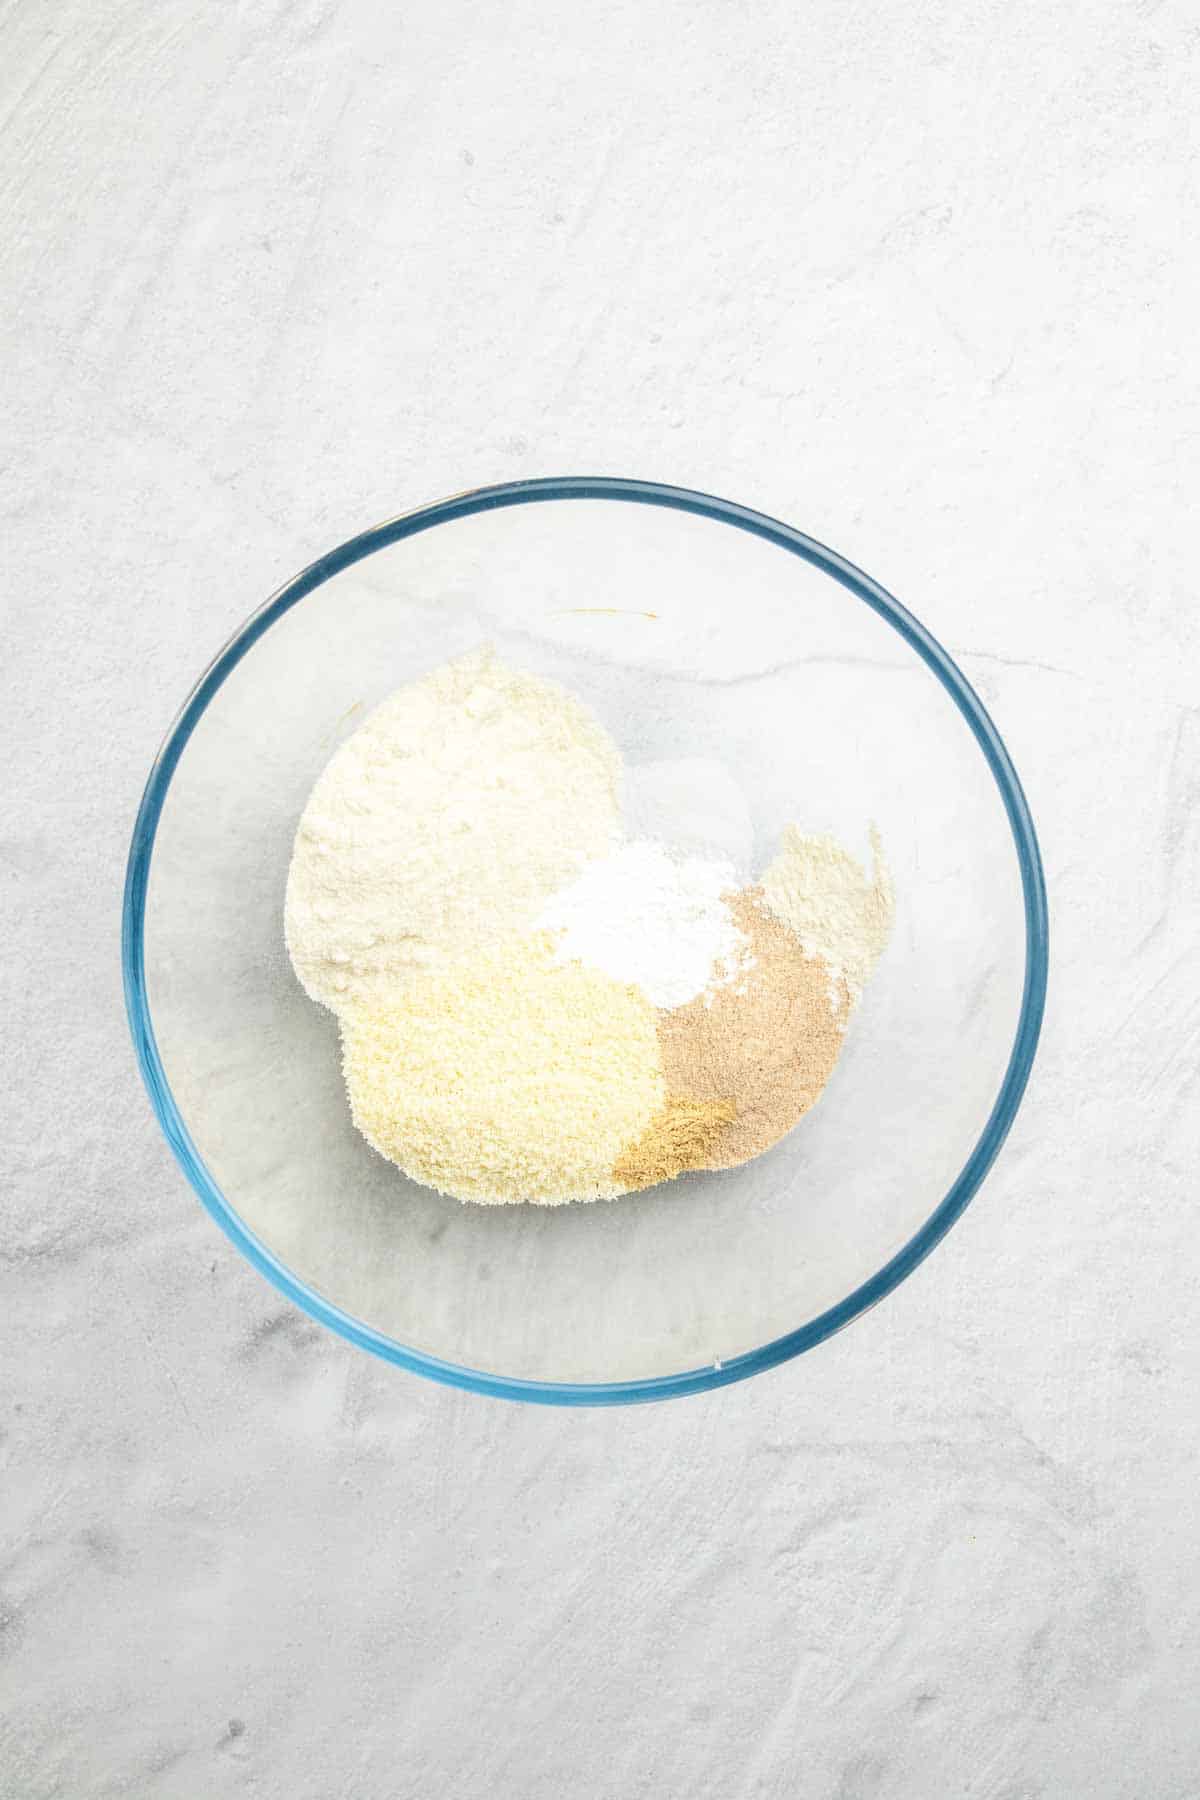 Dry ingredients in a glass bowl, as seen from above